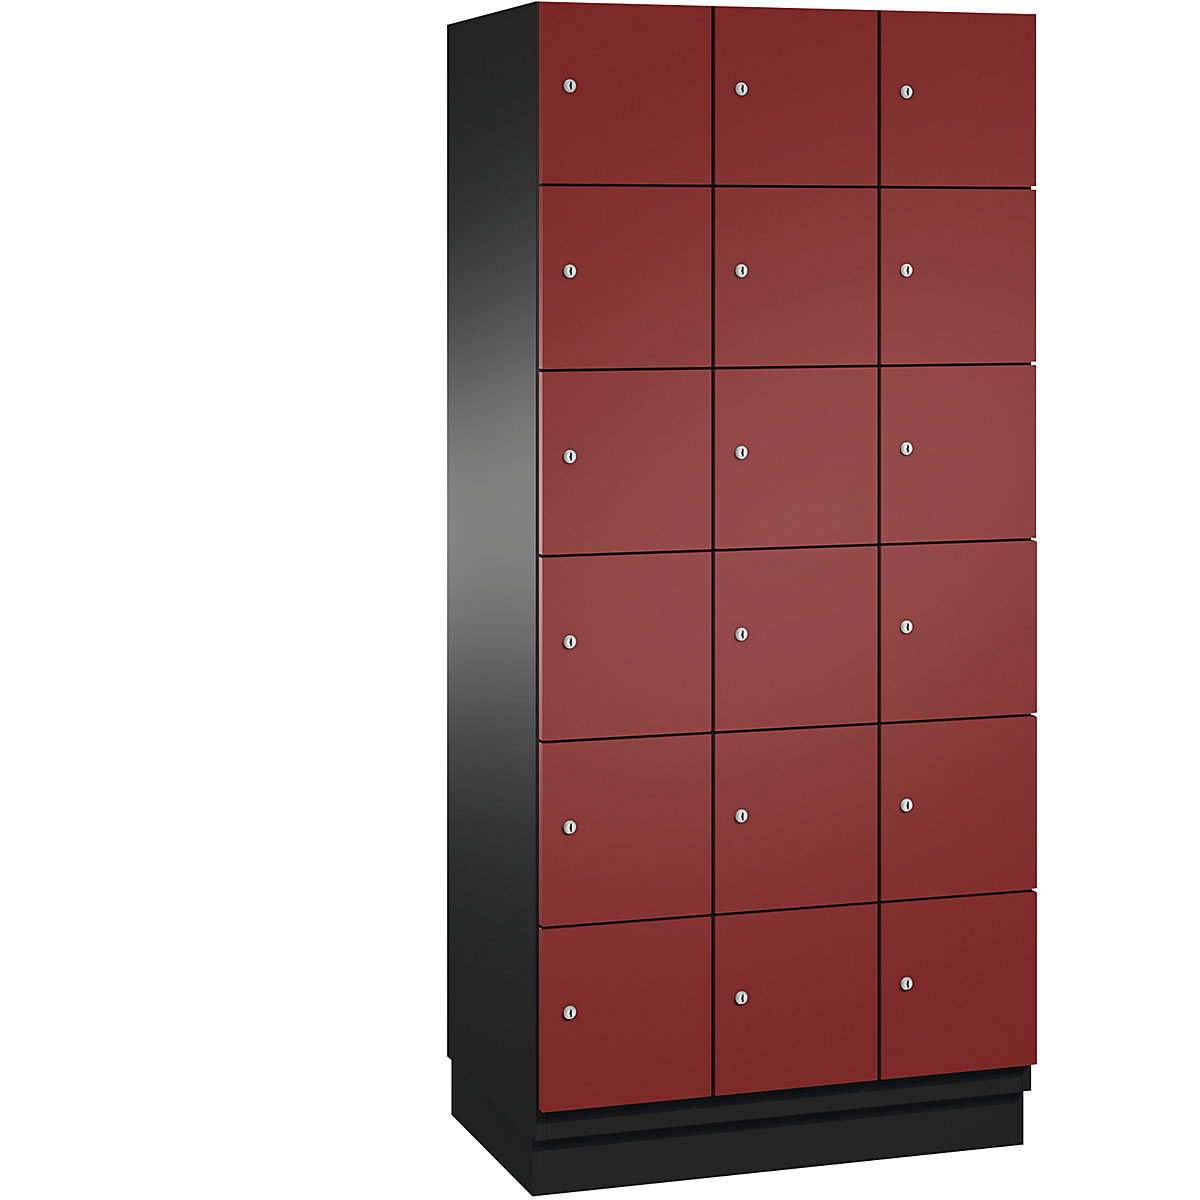 C+P – CAMBIO compartment locker with sheet steel doors, 18 compartments, width 900 mm, body black grey / door ruby red